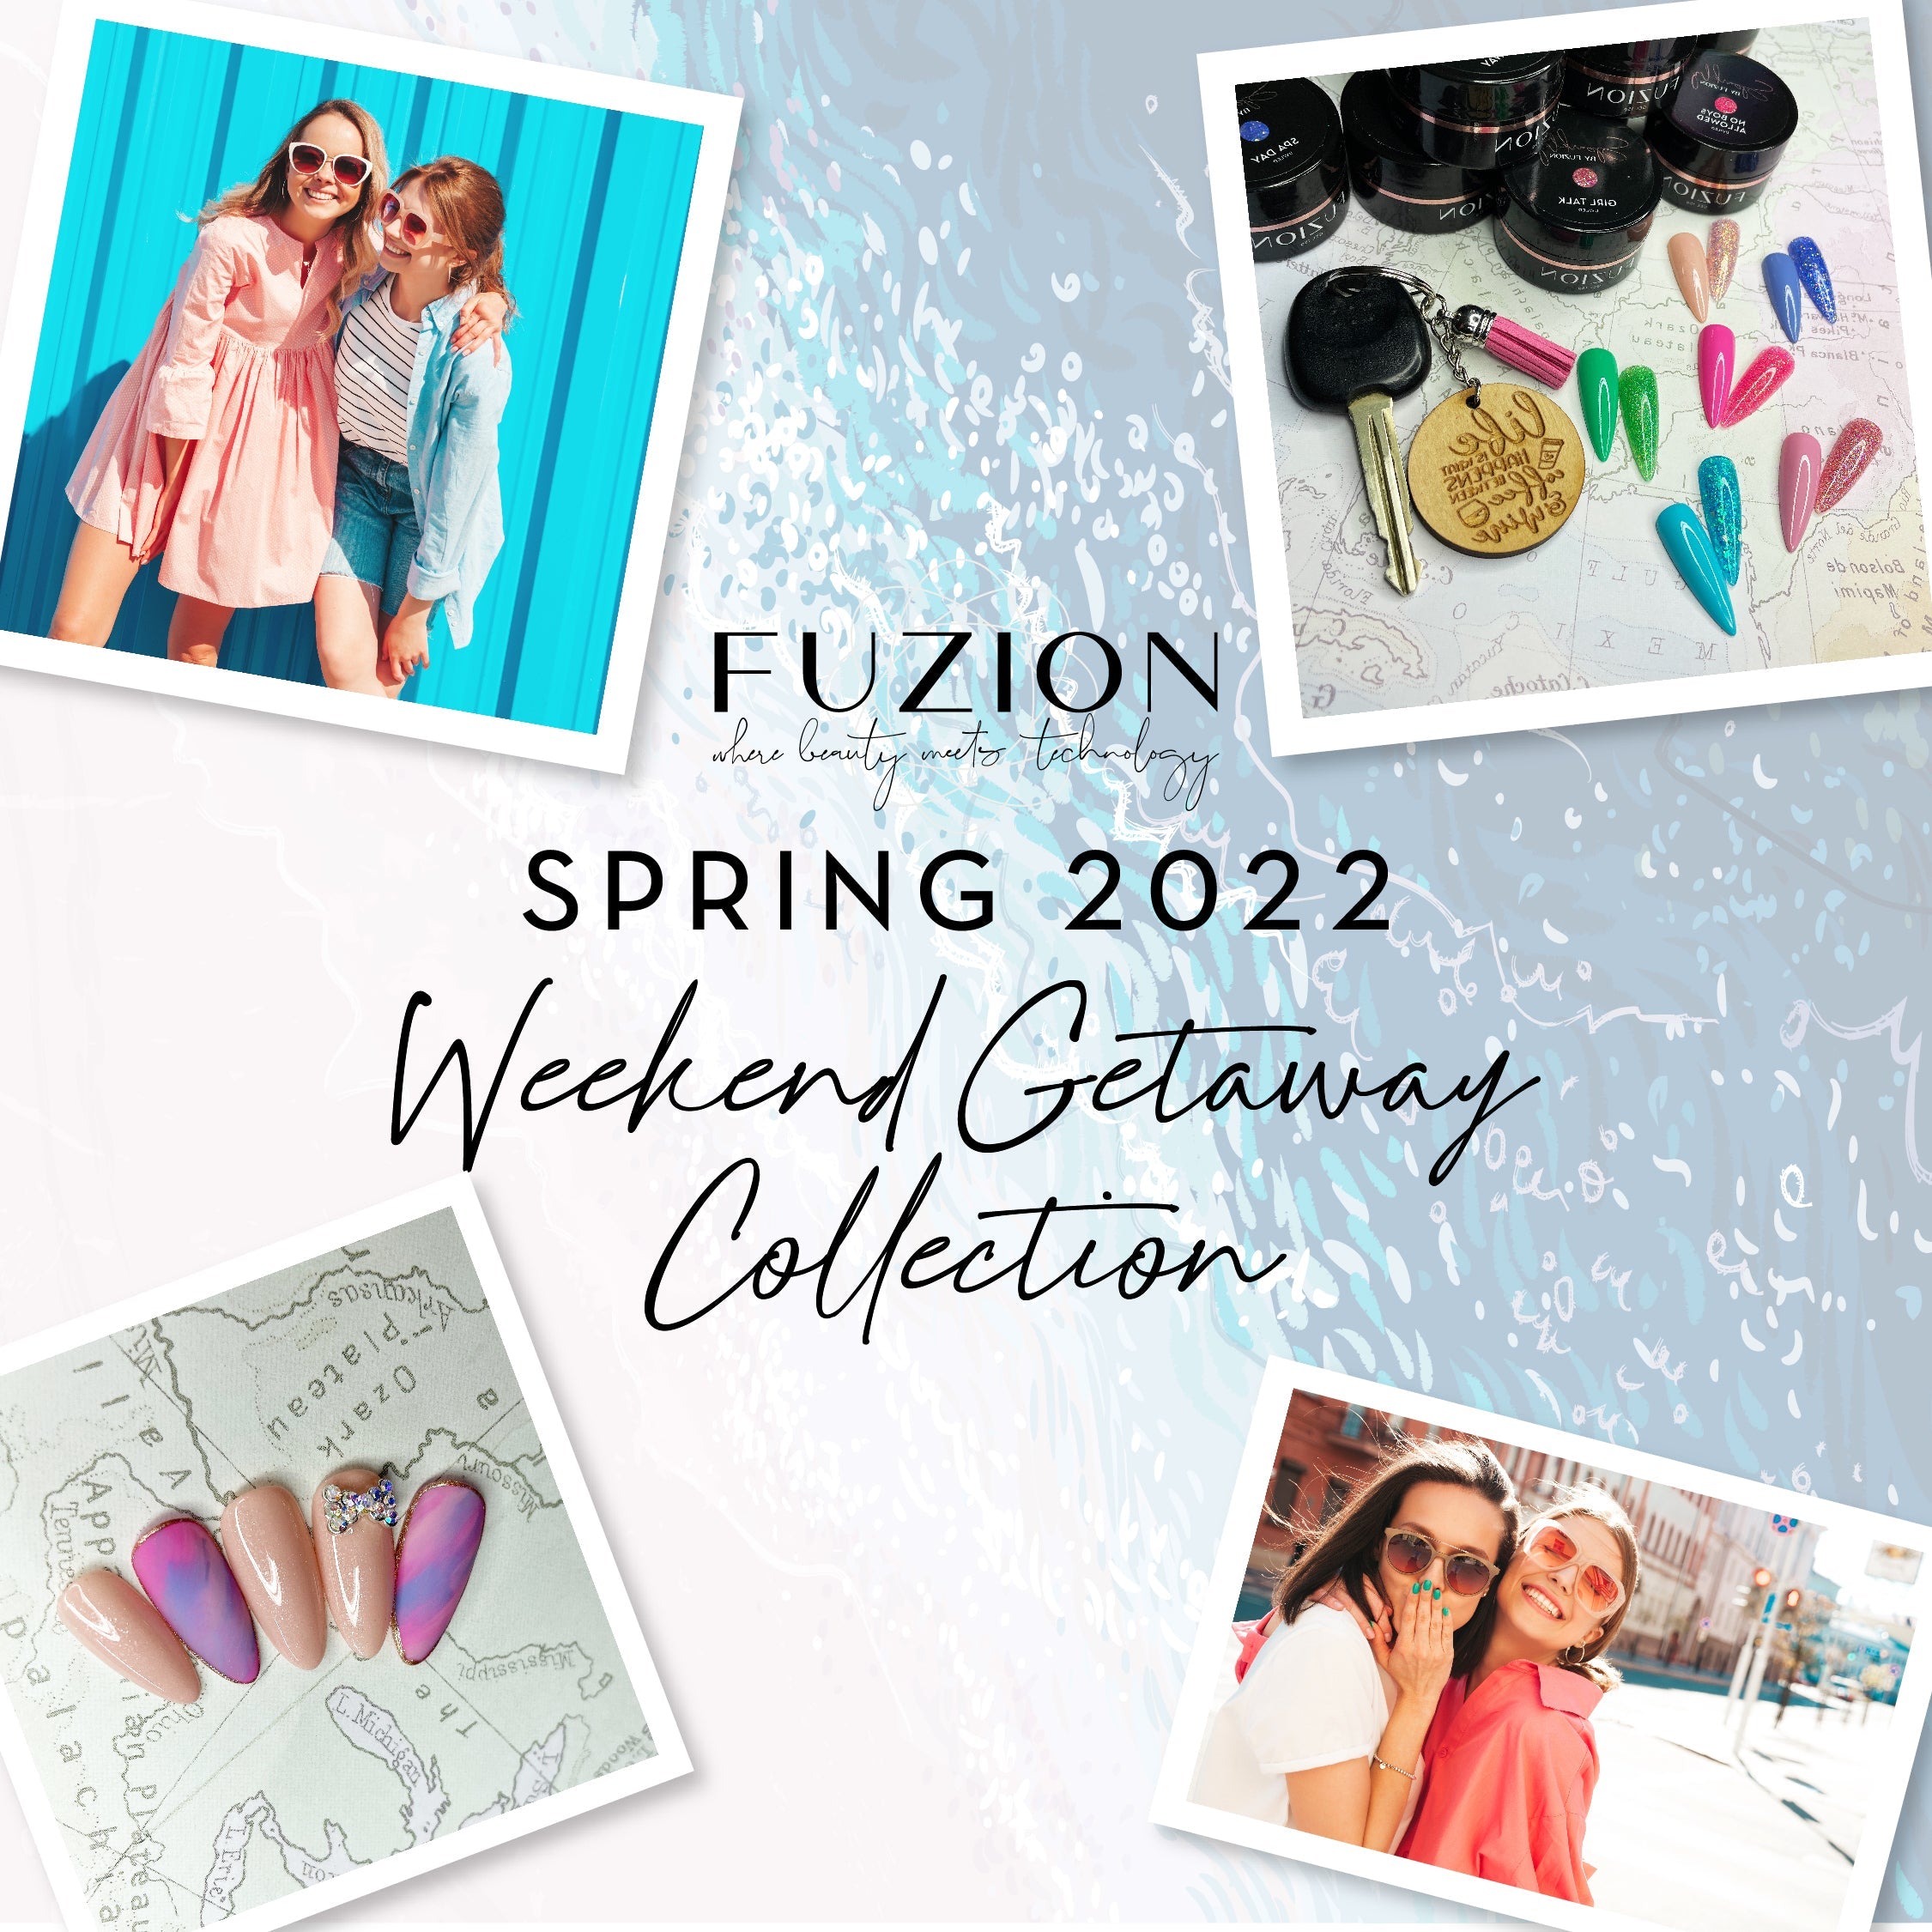 Fuzion Spring 2022 Collection - Weekend Getaway